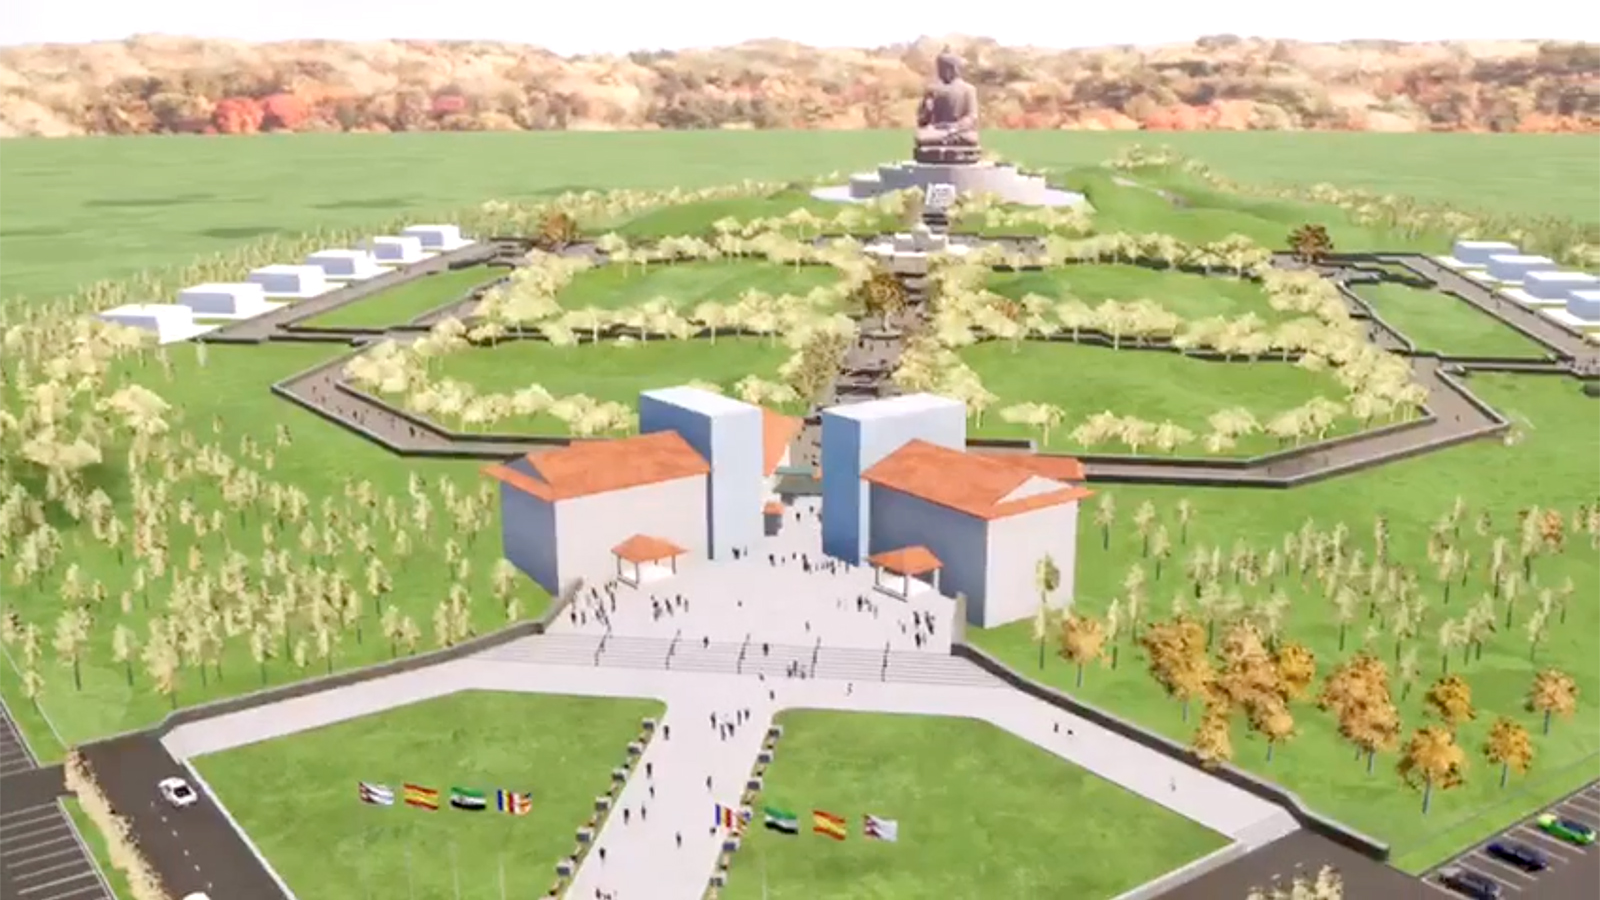 An artistic rendering of the proposed Lumbini Garden Foundation development in Cáceres, Extremadura, Spain, in 2019. (Image © Engineers' & Surveyors' Associates)